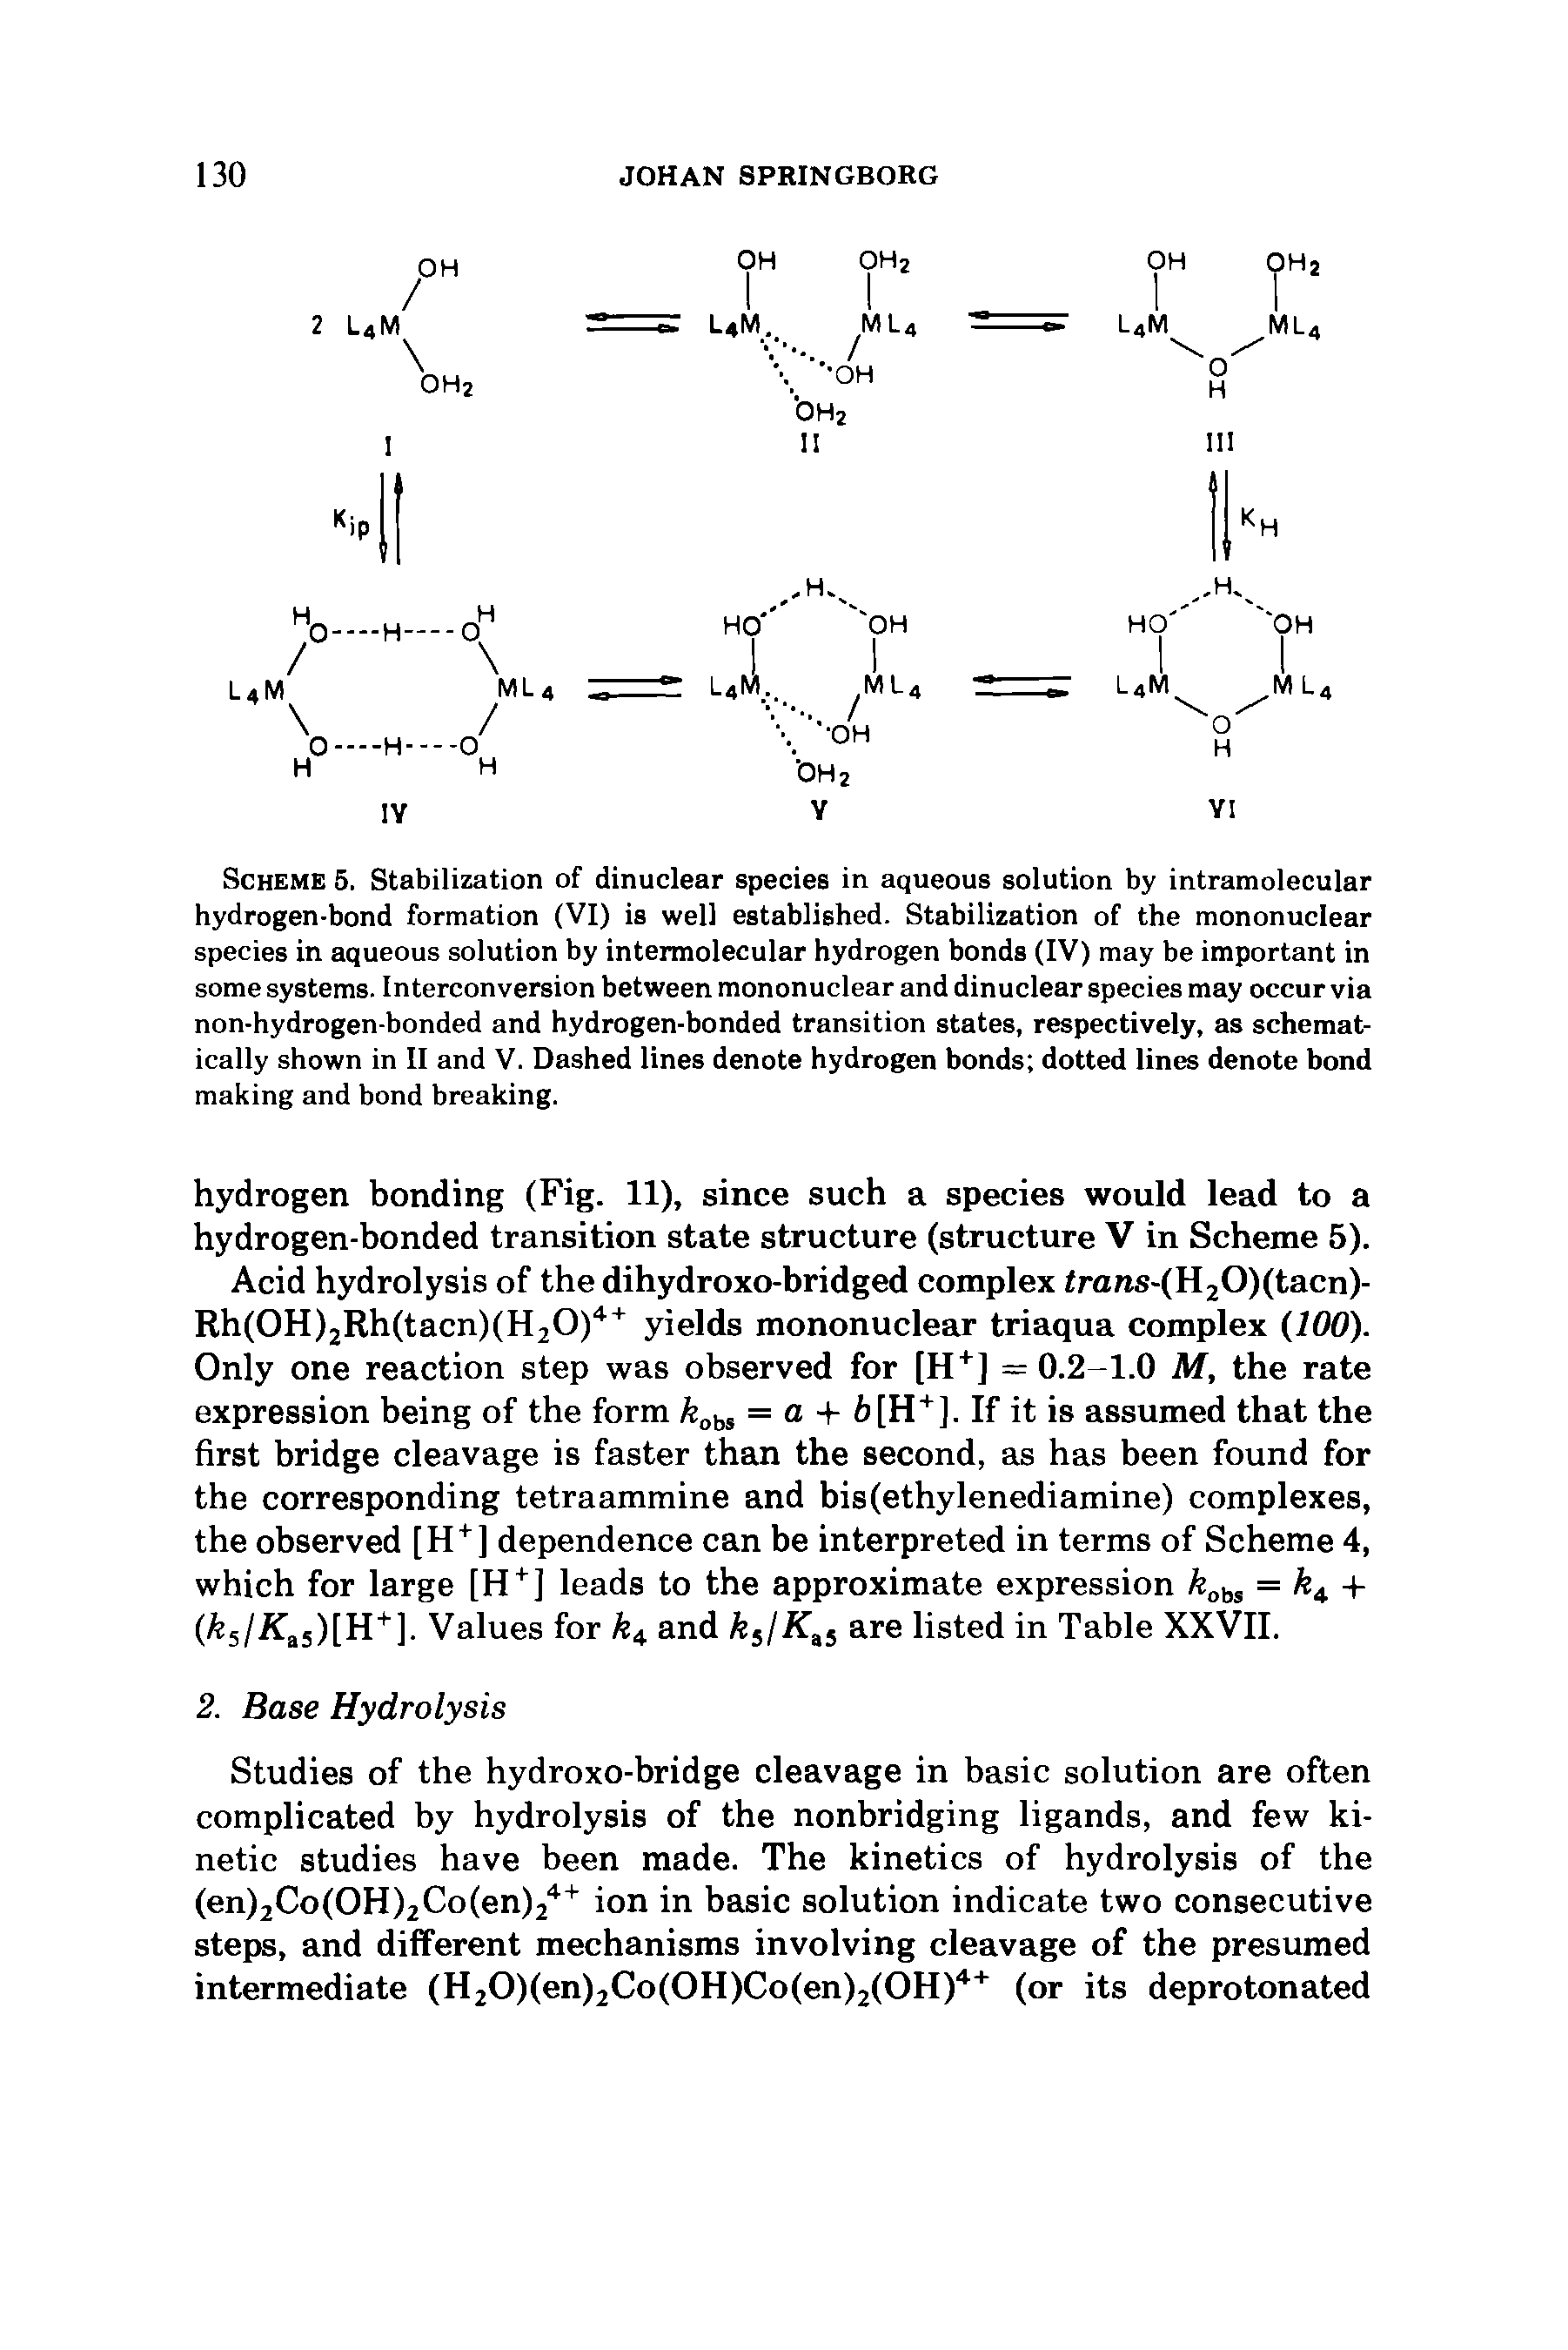 Scheme 5. Stabilization of dinuclear species in aqueous solution by intramolecular hydrogen-bond formation (VI) is well established. Stabilization of the mononuclear species in aqueous solution by intermolecular hydrogen bonds (IV) may be important in some systems. Interconversion between mononuclear and dinuclear species may occur via non-hydrogen-bonded and hydrogen-bonded transition states, respectively, as schematically shown in II and V. Dashed lines denote hydrogen bonds dotted lines denote bond making and bond breaking.